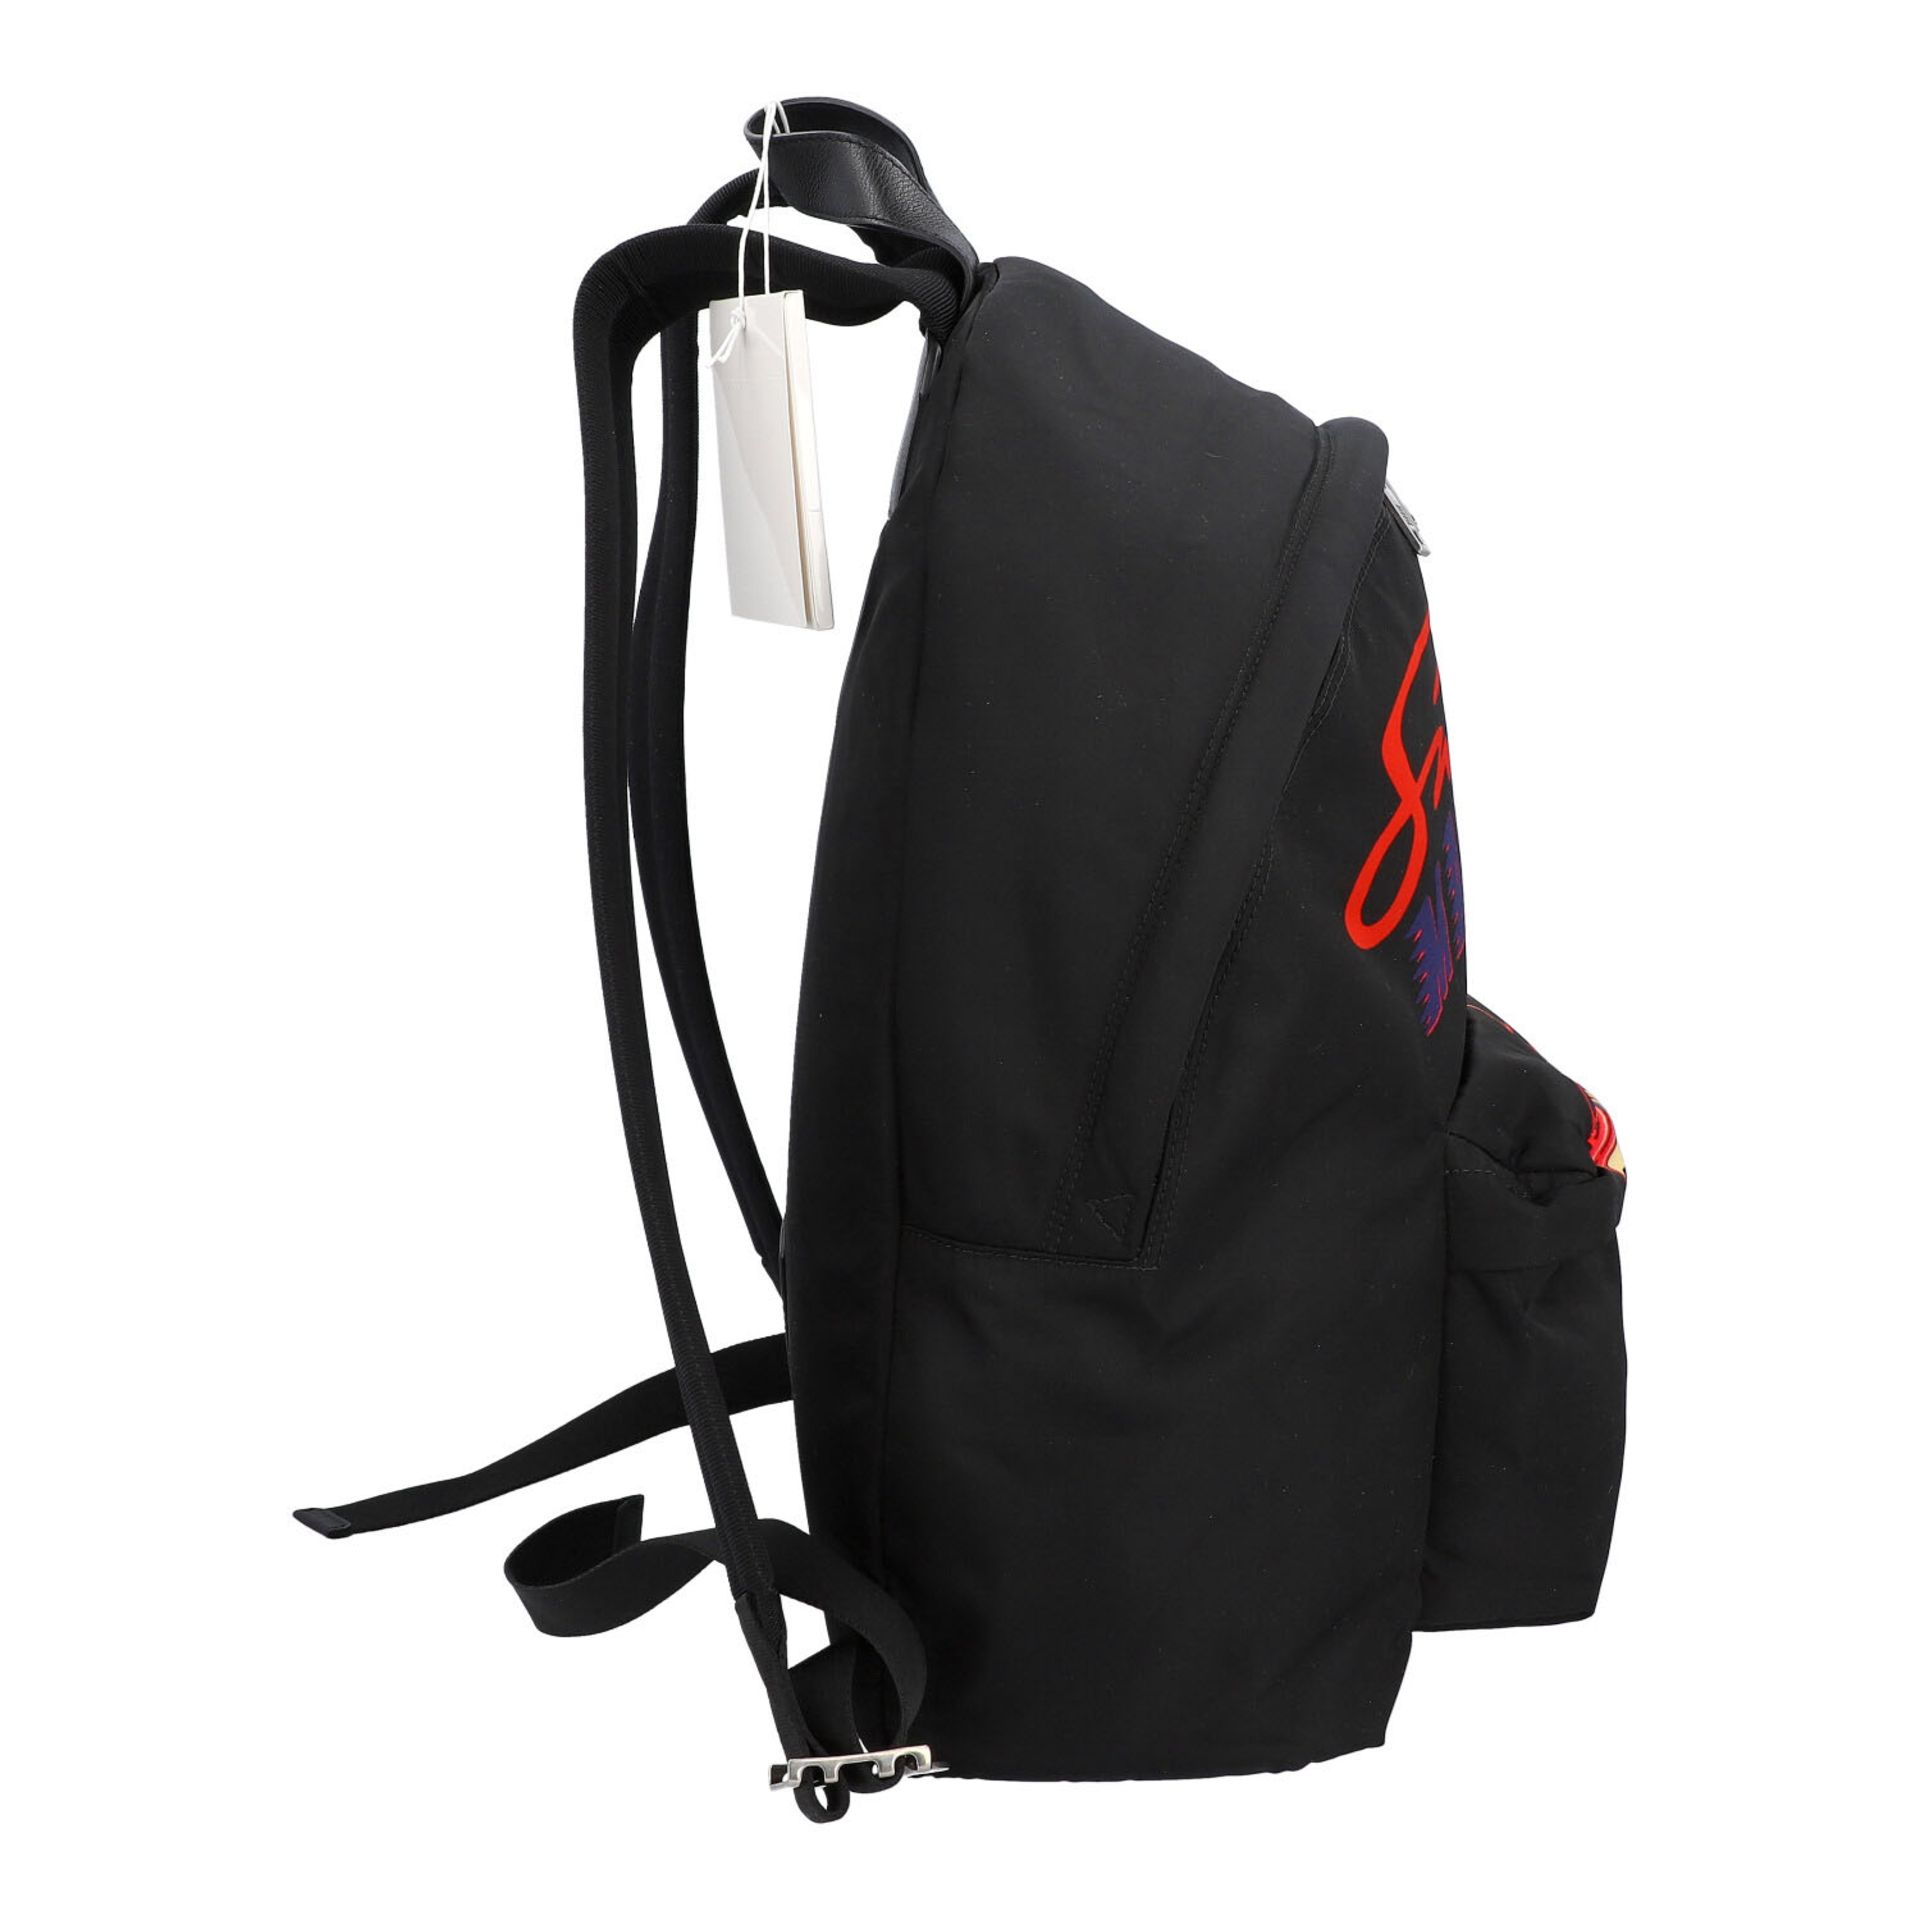 GIVENCHY Rucksack "MAD LOVE TOUR". - Image 3 of 8